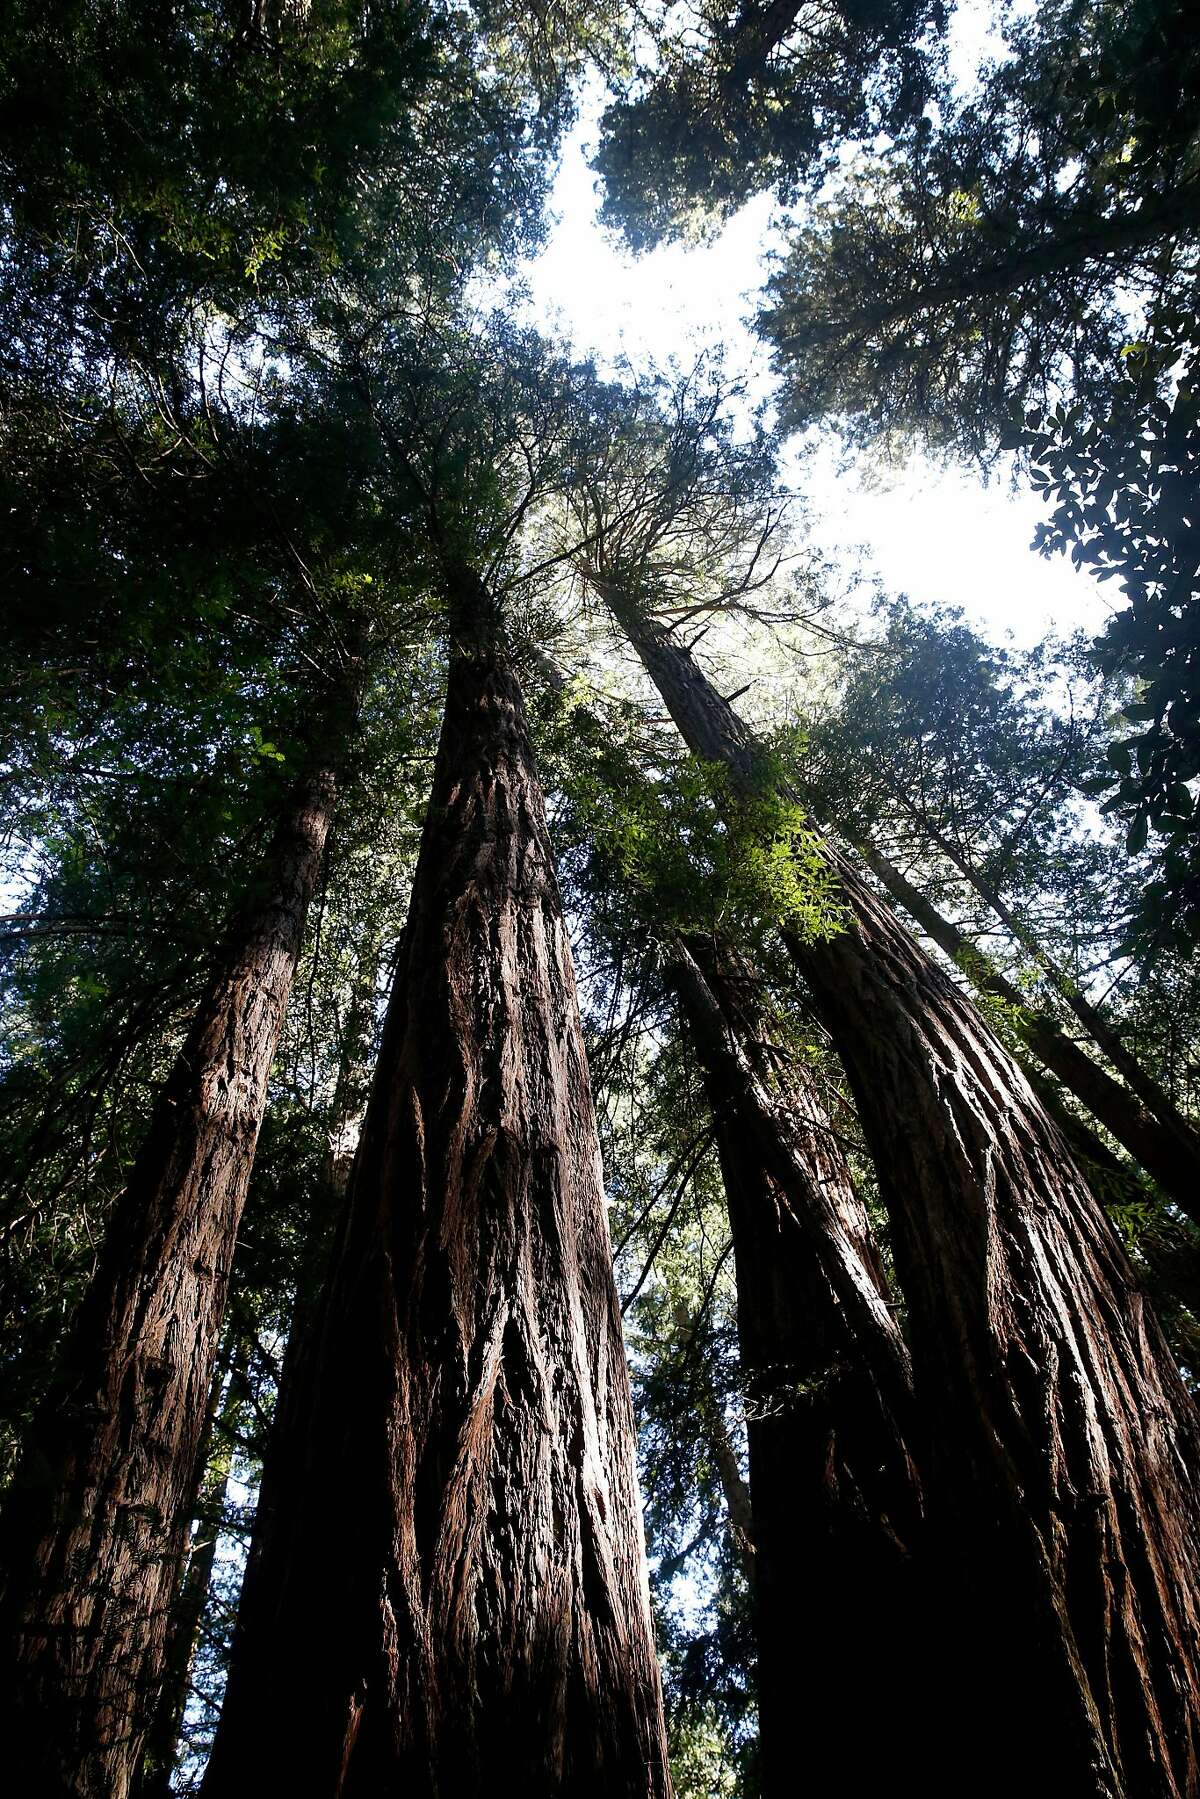 Old growth coast redwoods tower above the ground at Muir Woods National Monument in Mill Valley, Calif. on Tuesday, April 17, 2018. The Save the Redwoods League has released its first ever State of Redwoods Conservation Report.